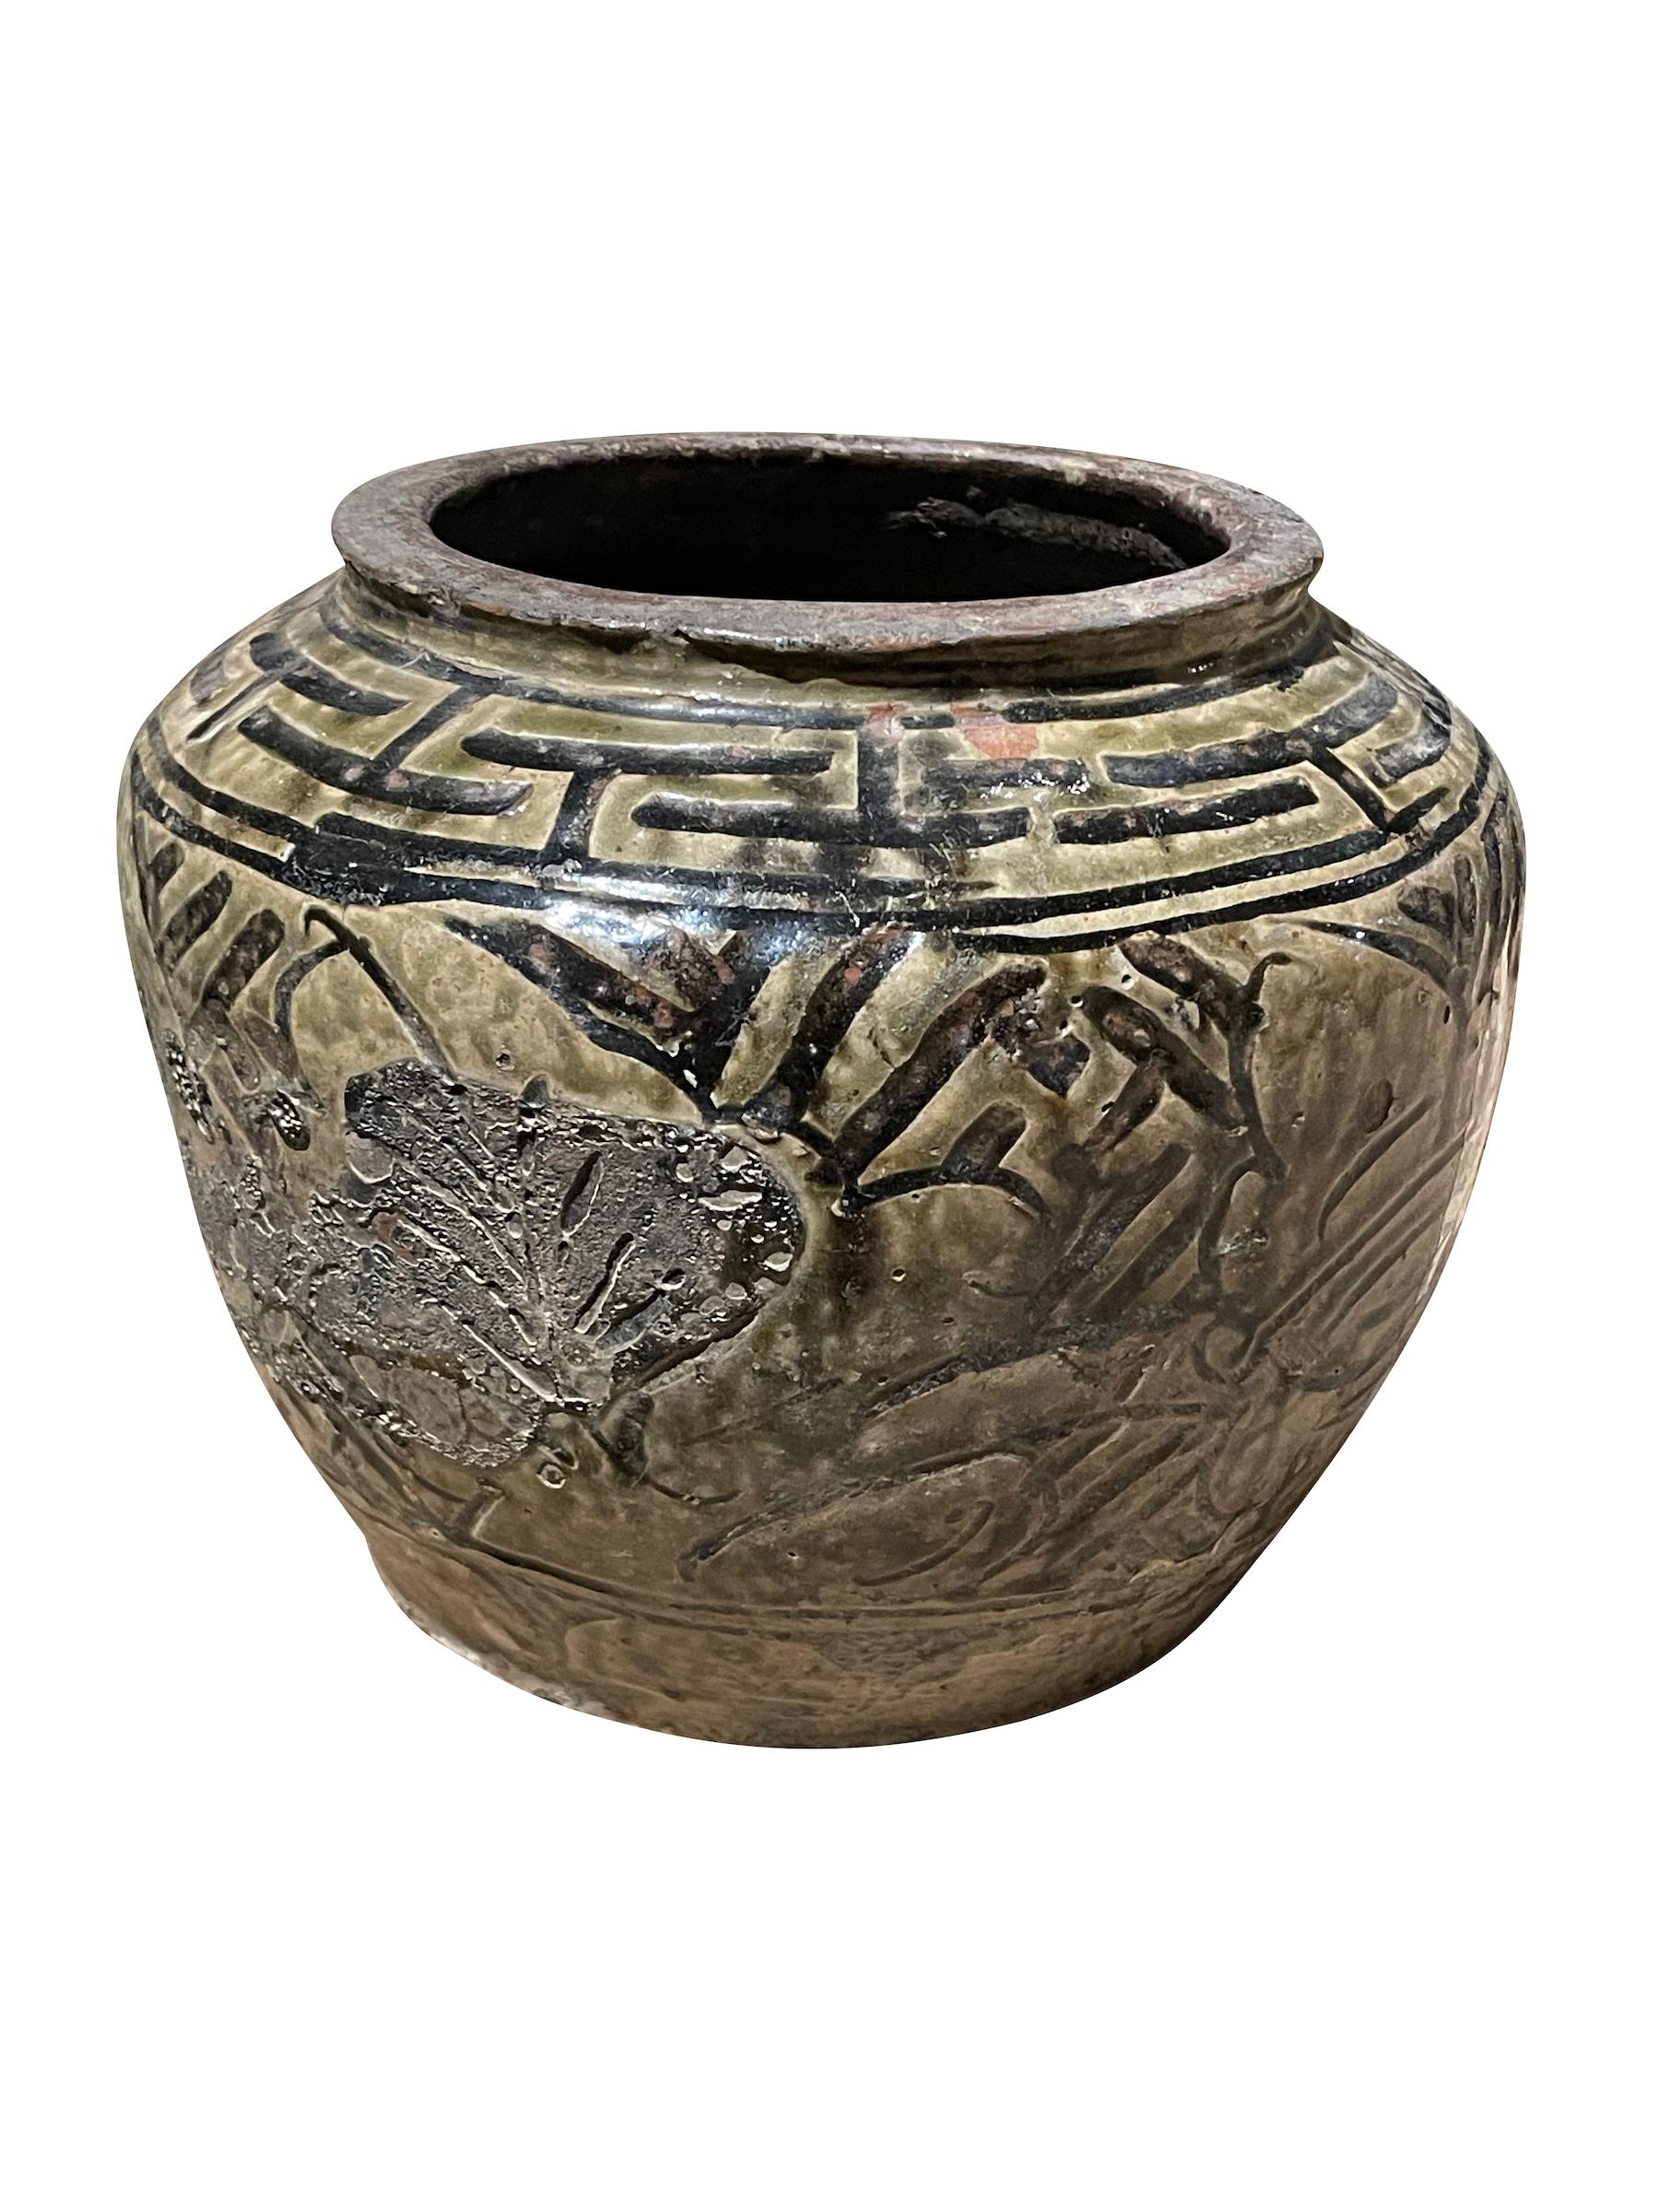 19th century Chinese classic shaped pot with traditional olive glaze.
Decorative geometric design along top of vase.
Natural weathered patina and age.
Part of a large collection
